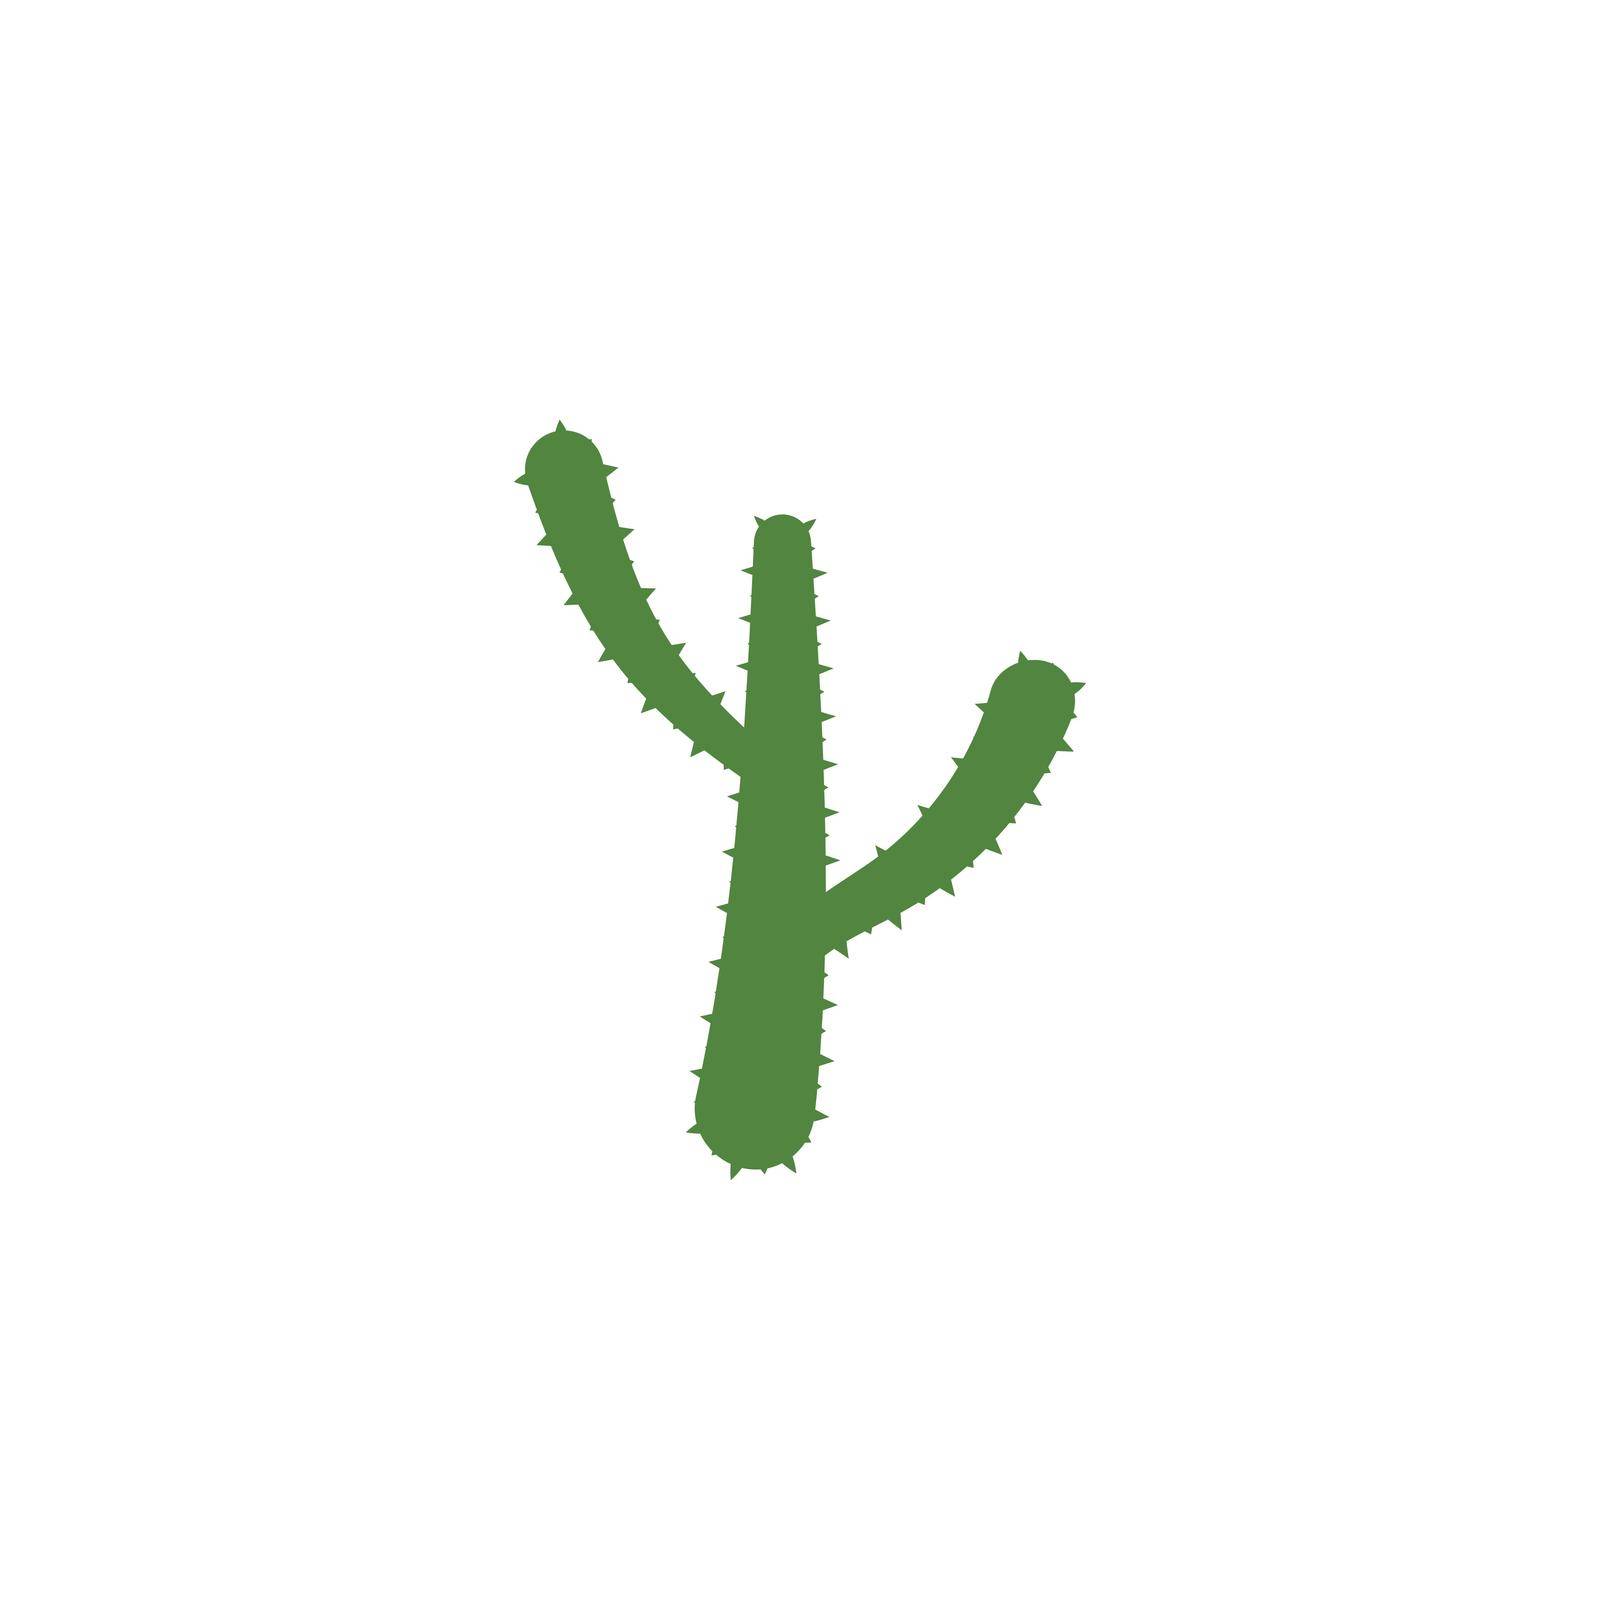 Cactus Logo template by awk